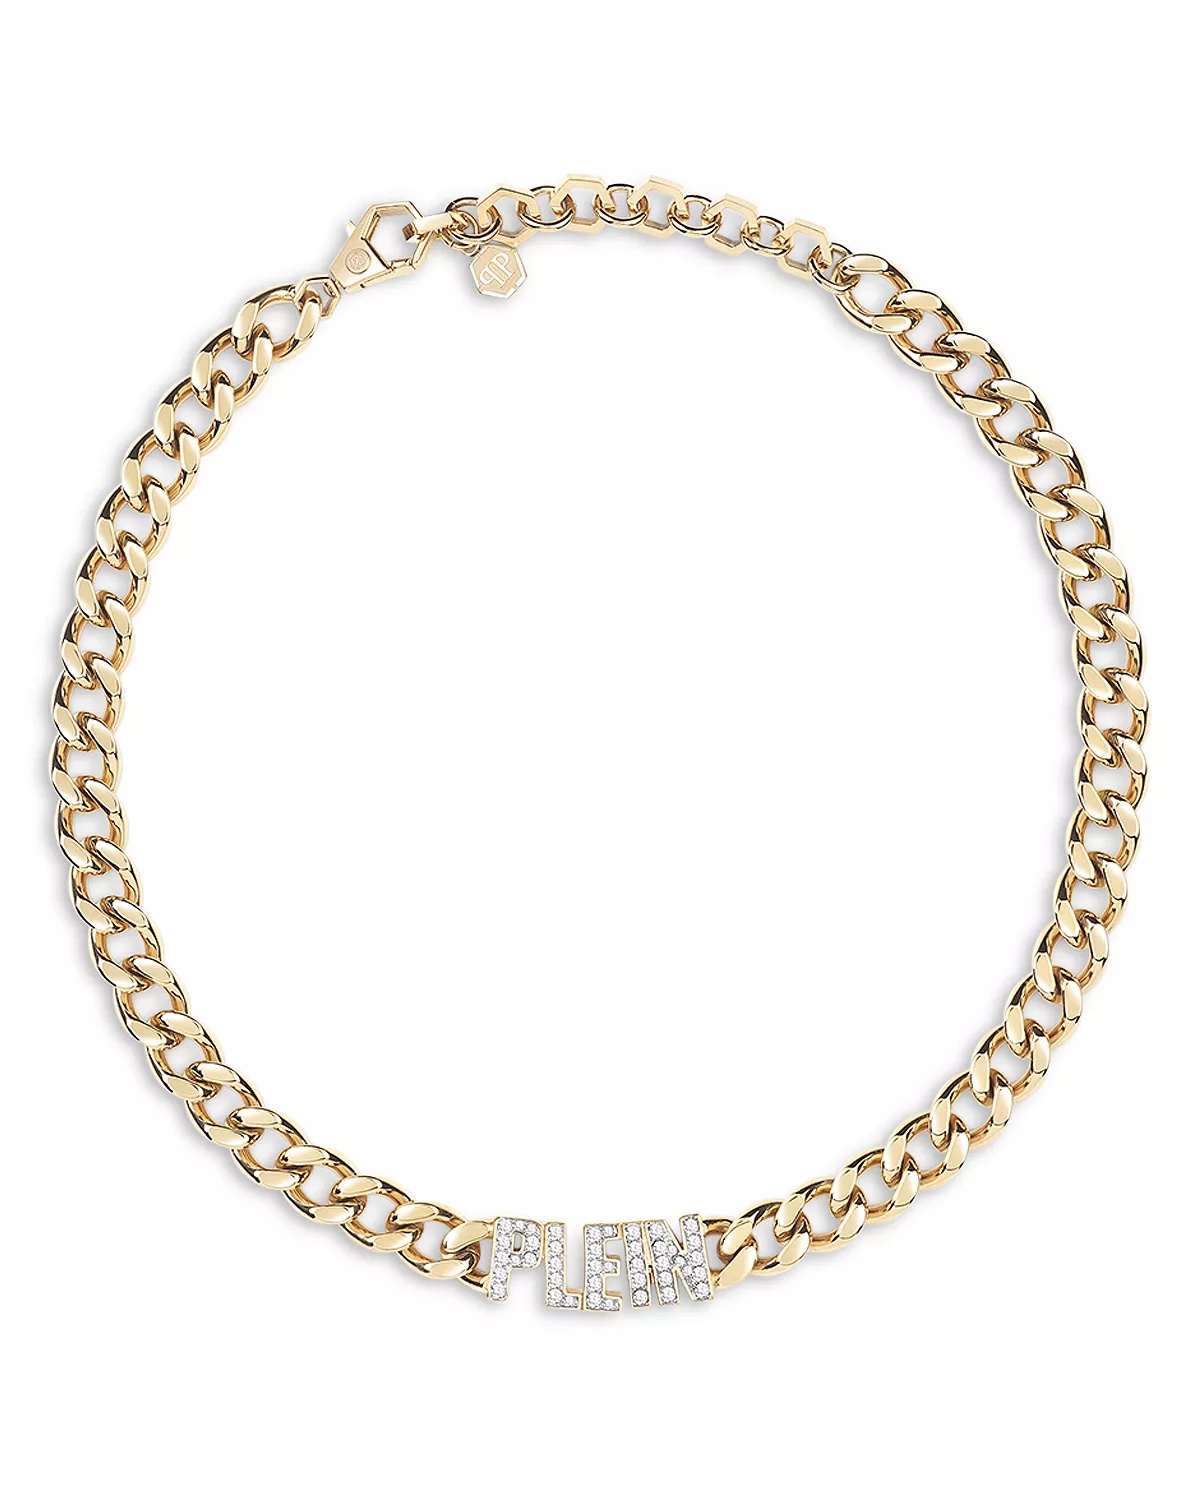 Lettering Gold Tone Chain Necklace, 15" - 1